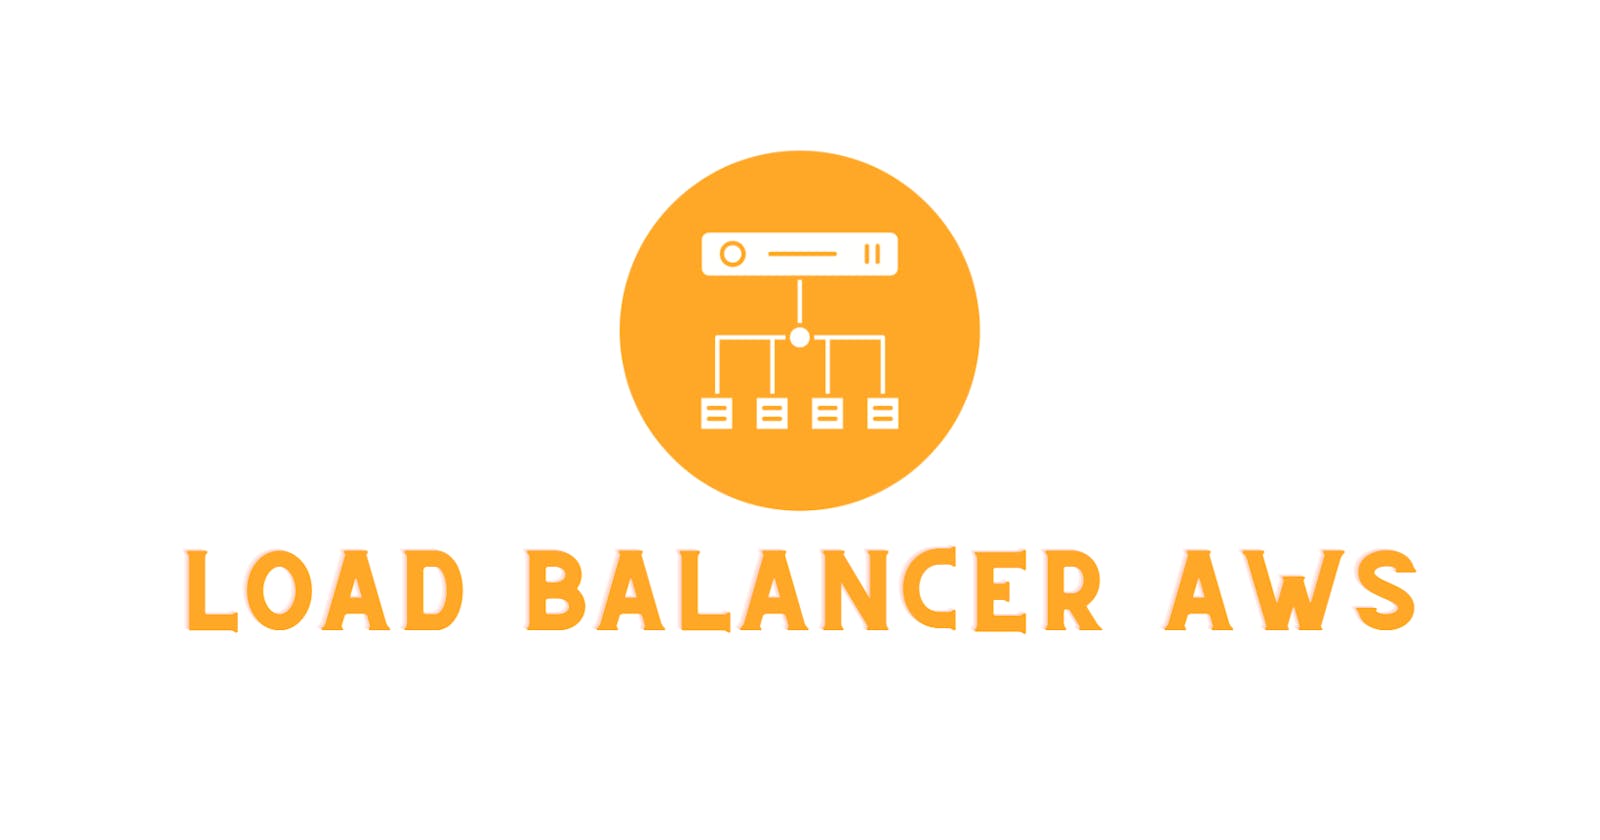 How We Can Use Load Balancer in AWS.